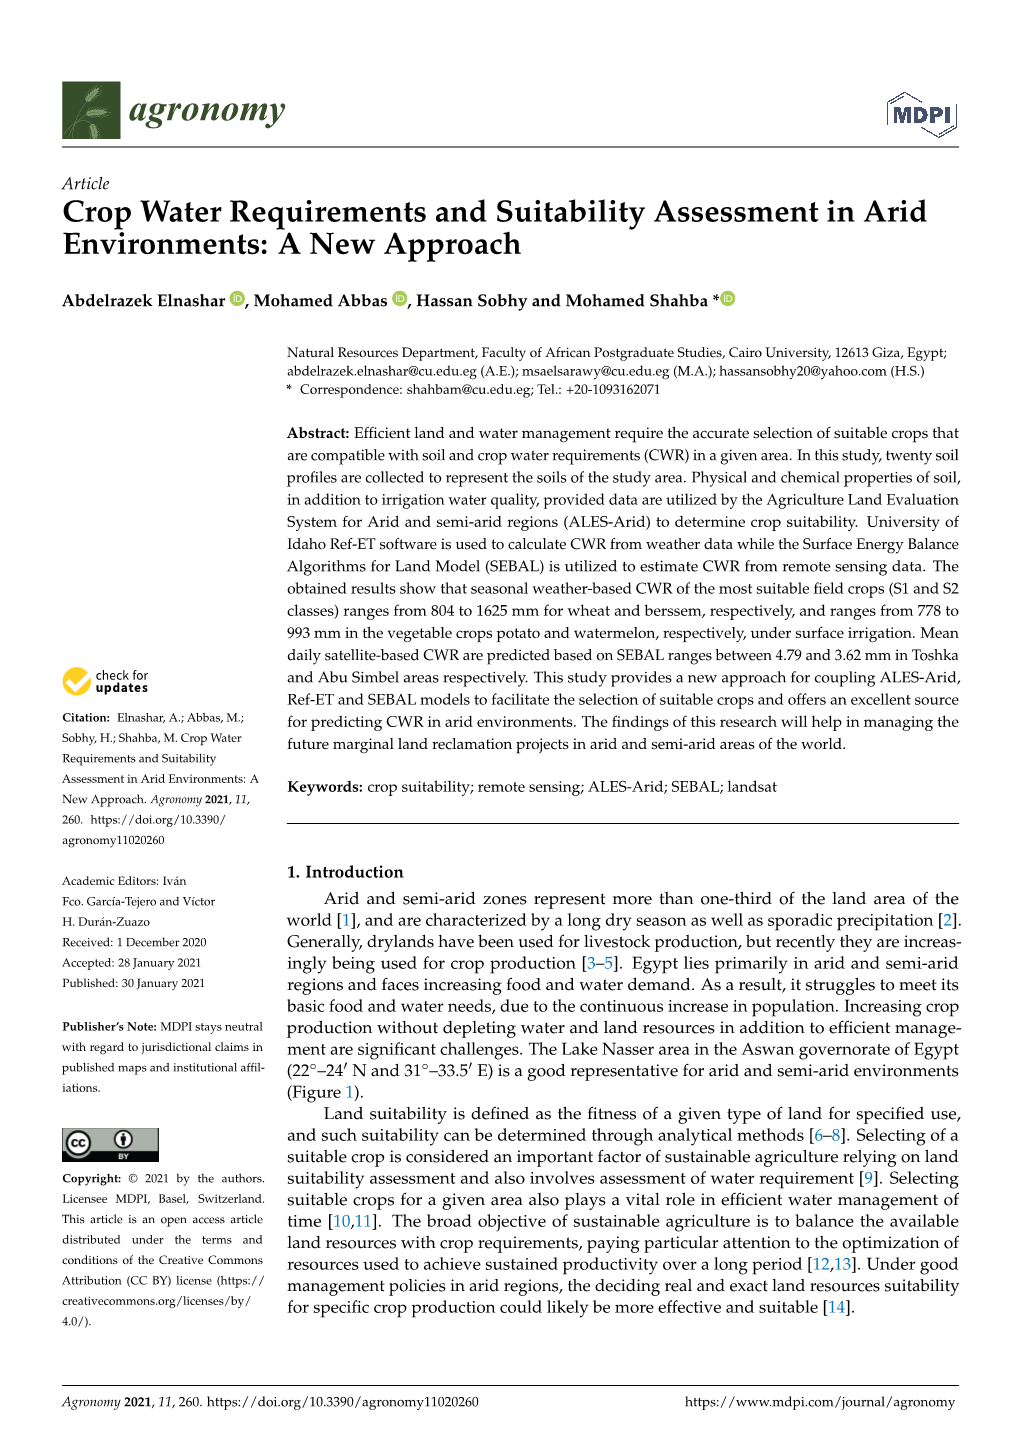 Crop Water Requirements and Suitability Assessment in Arid Environments: a New Approach